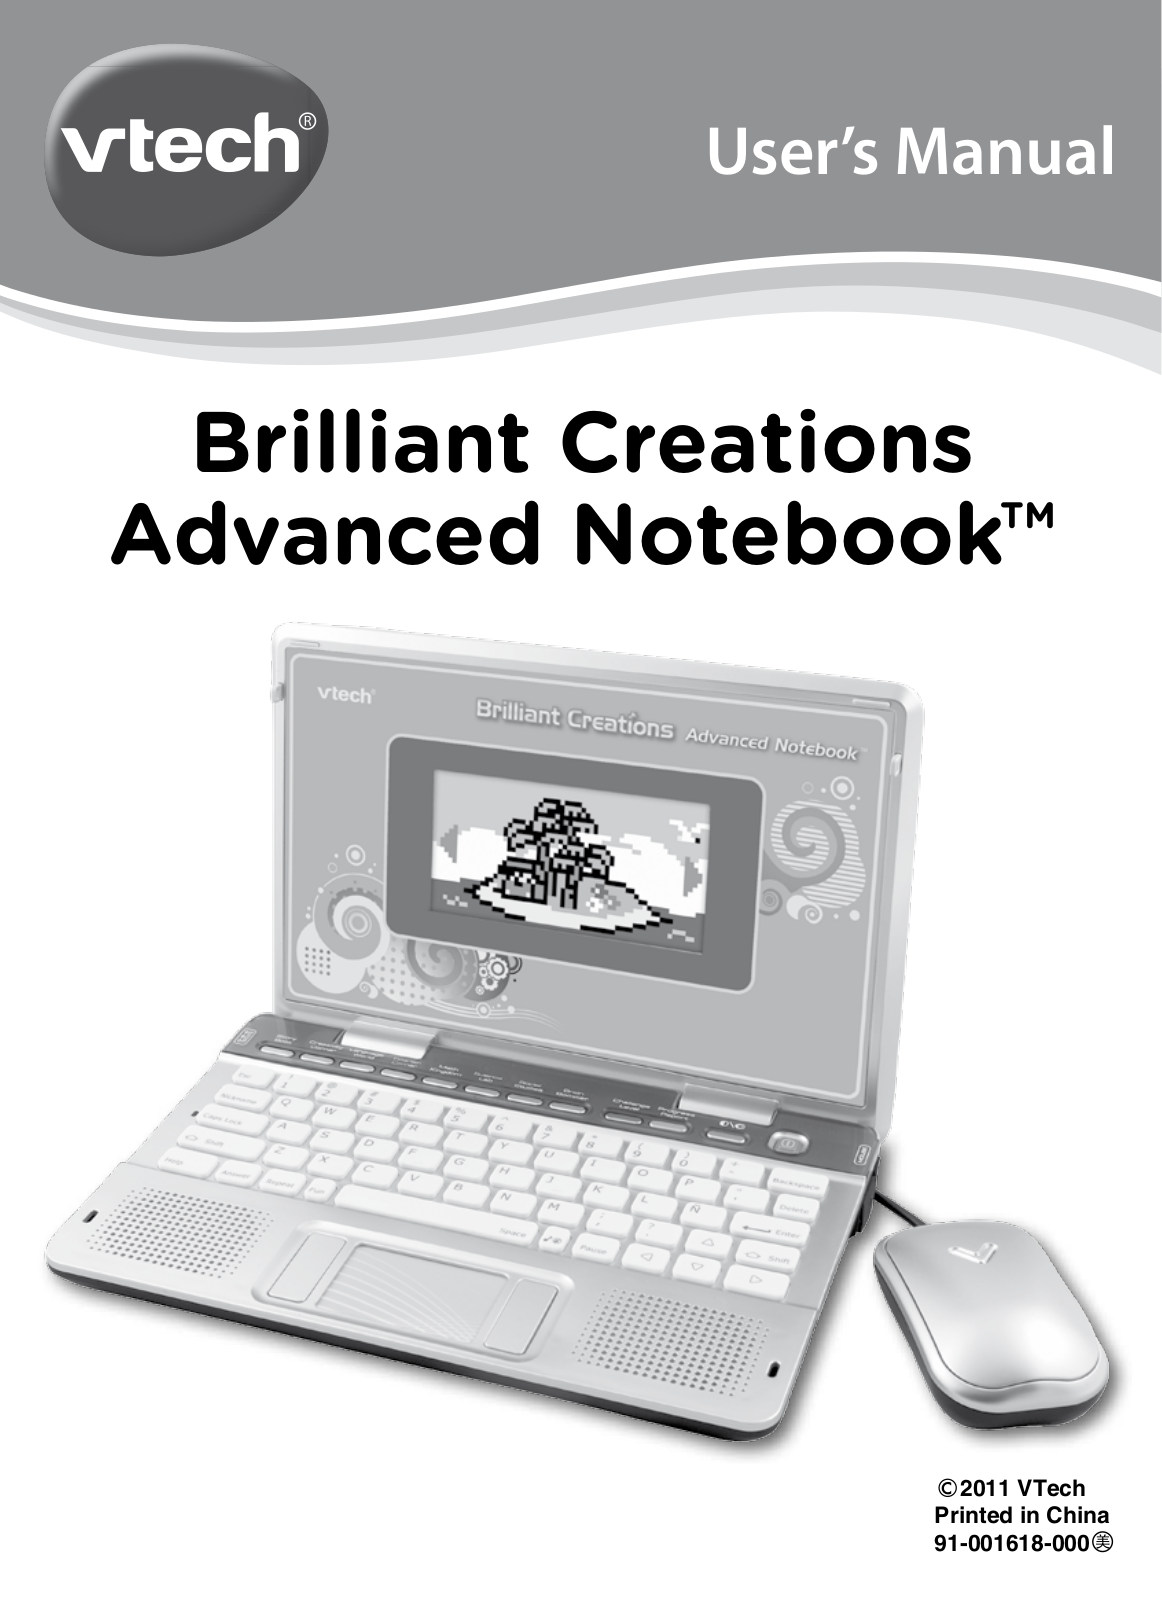 VTech Brilliant Creations Advanced Notebook Owner's Manual